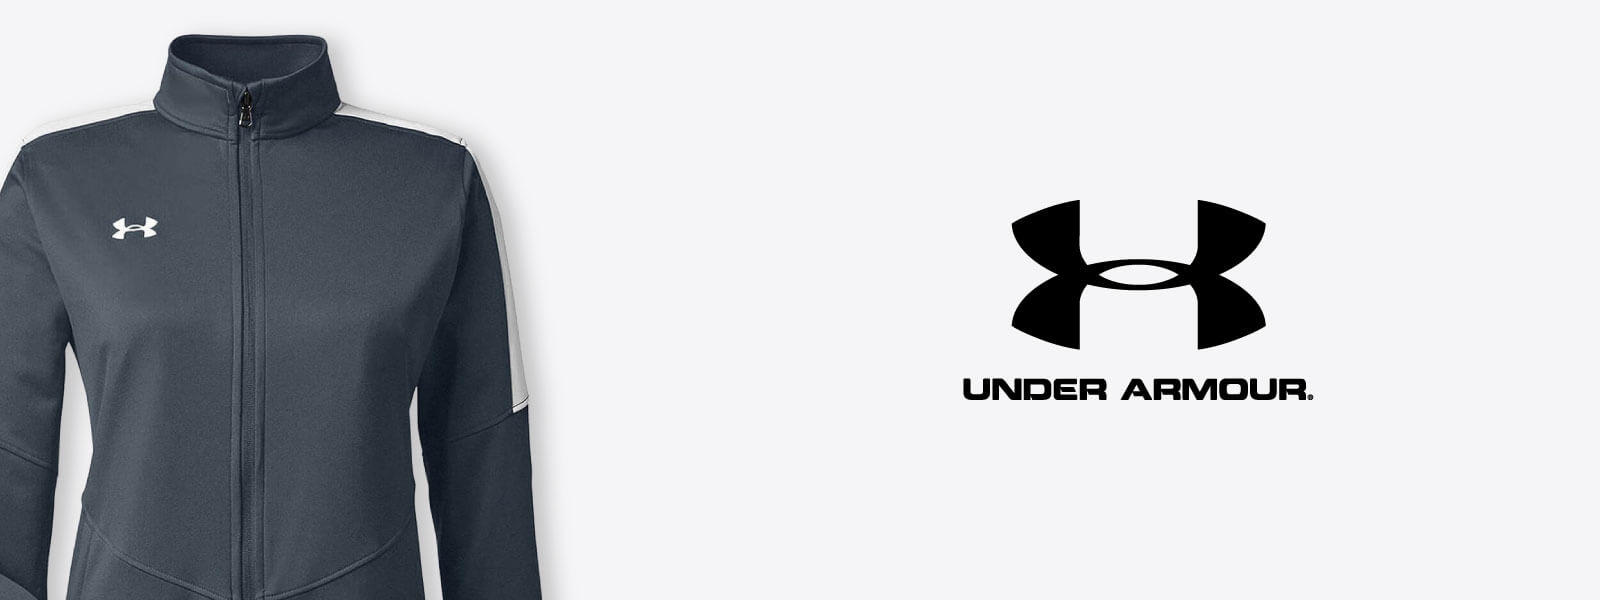 Customize Your Own Under Armour. Custom Under Armour Hoodie. Custom Embroidered Polo Shirts.